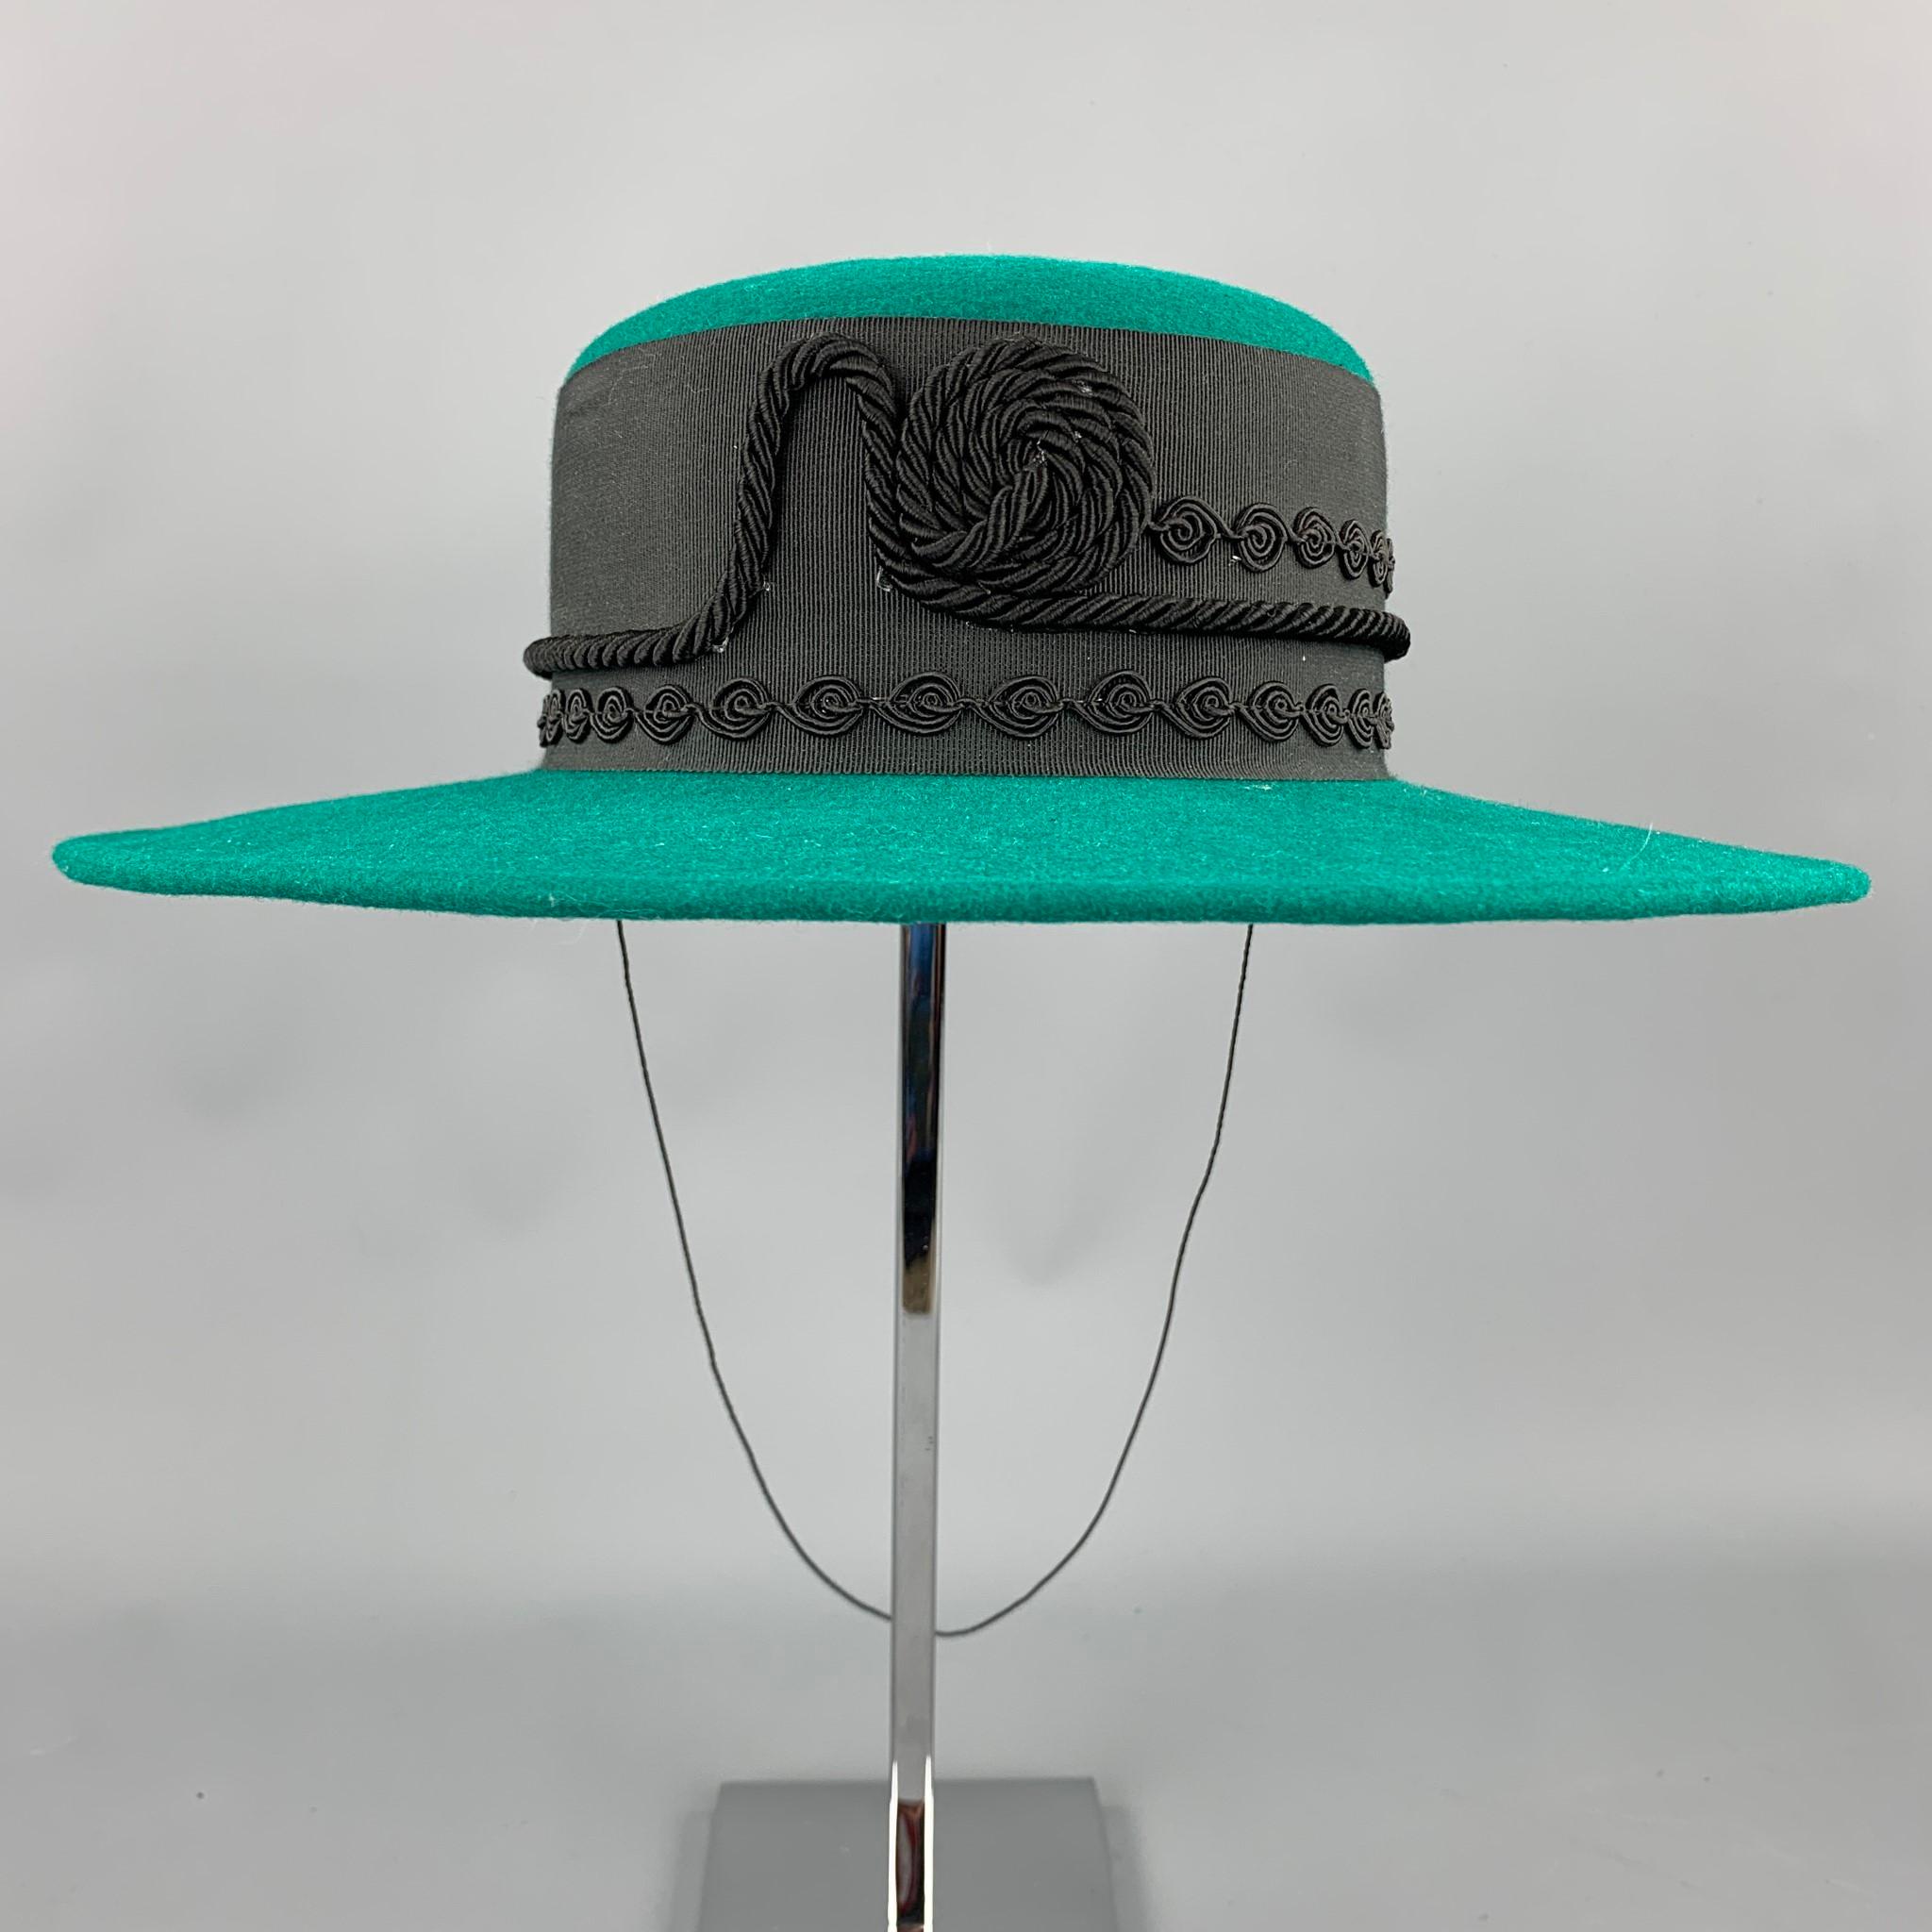 LONNI hat comes in a green wool with a black ribbon trim featuring a drawstring detail. Made in USA.

Very Good Pre-Owned Condition.
Marked: No size marked

Measurements:

Opening: 16 in. 
Brim: 3.5 in. 
Height: 3 in. 

SKU: 95450
Category: